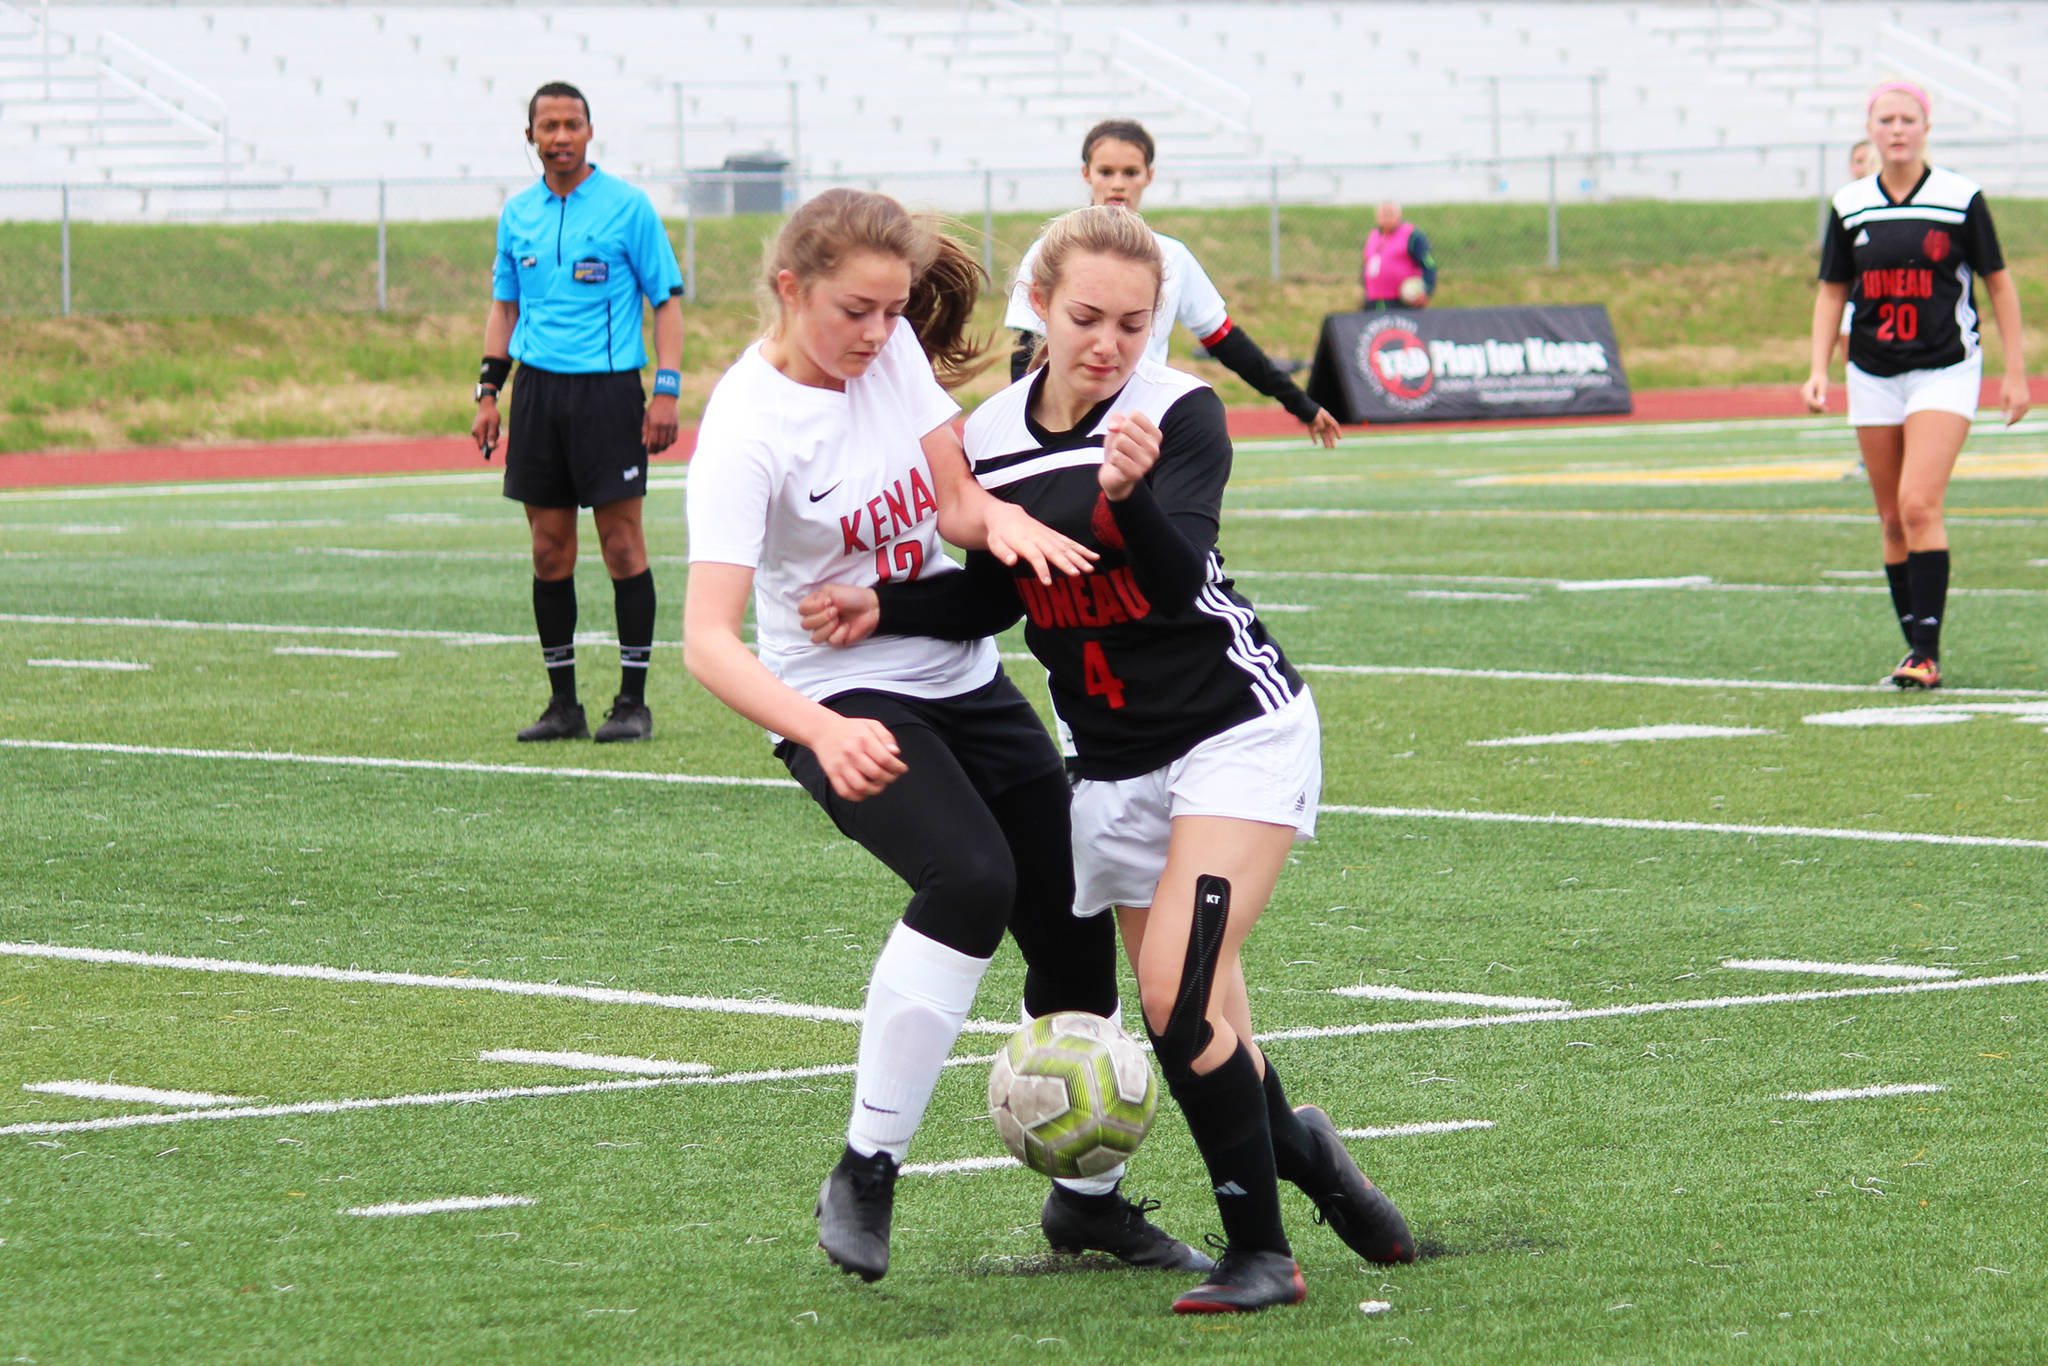 Kenai’s Rileigh Pace (left) and Juneau’s Kyla Bentz (right) battle for the ball in a Friday, May 24, 2019 semifinal game during the Division II state soccer championship tournament at Service High School in Anchorage, Alaska. (Photo by Megan Pacer/Homer News)